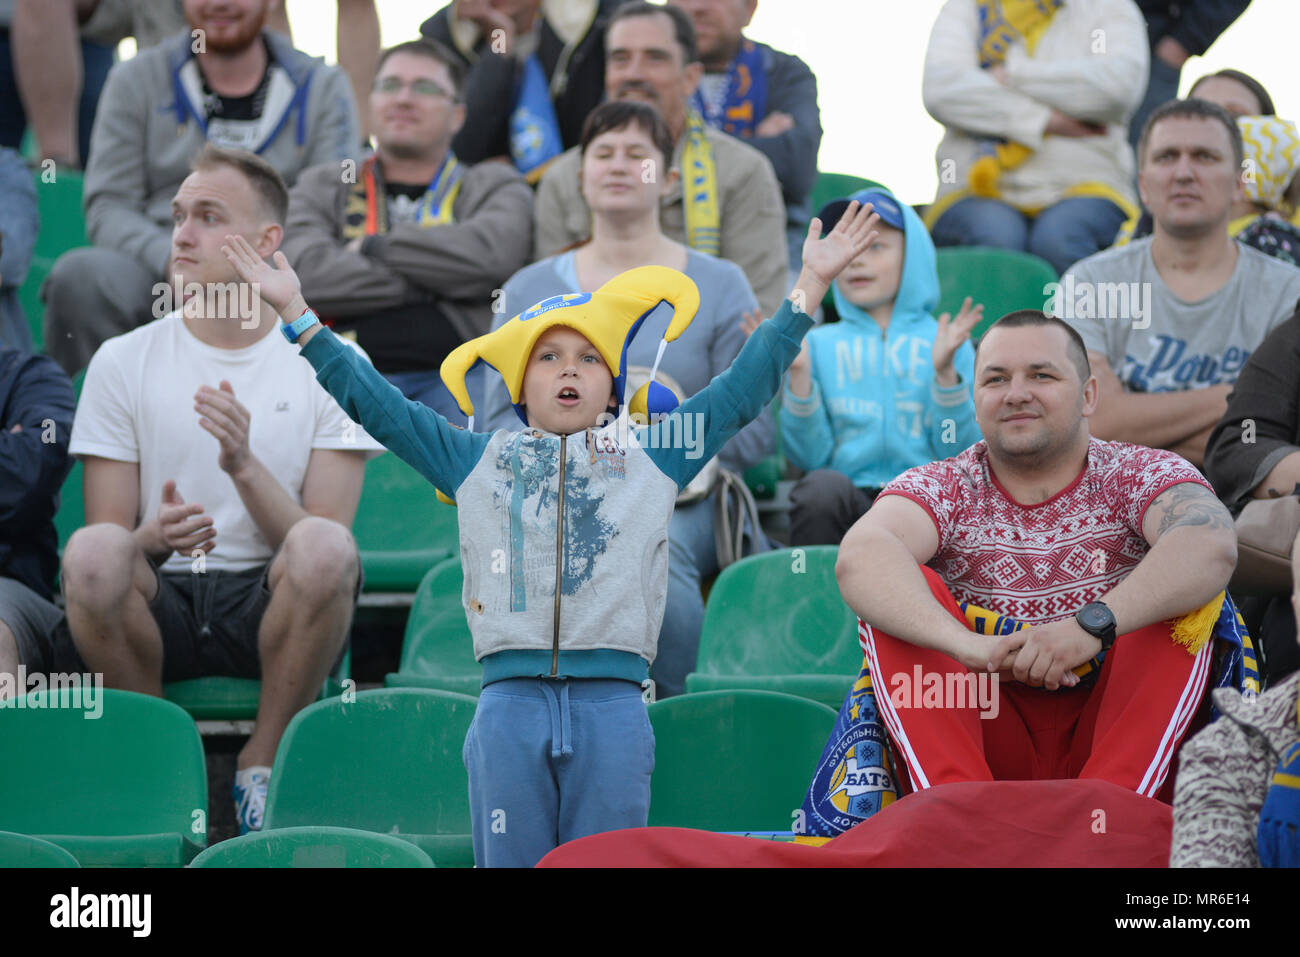 MINSK, BELARUS - MAY 23, 2018: Little fan having fun during the Belarusian Premier League football match between FC Dynamo Minsk and FC Bate at the Tractor stadium. Stock Photo